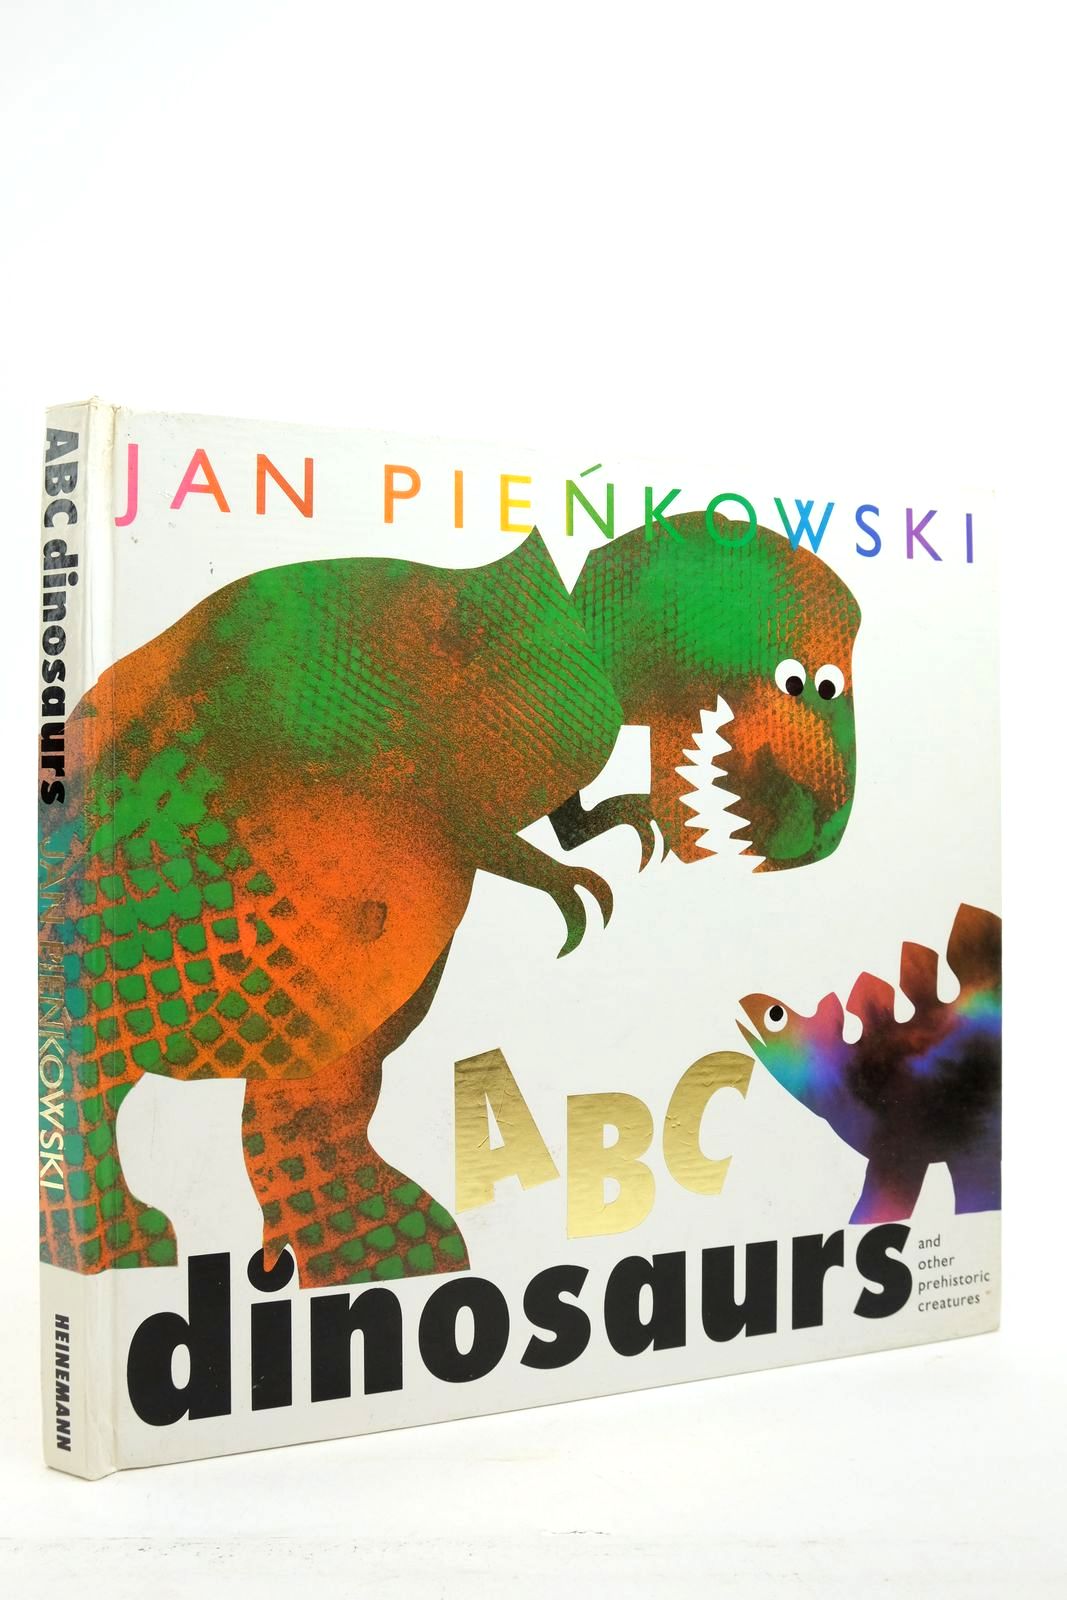 Photo of ABC DINOSAURS AND OTHER PREHISTORIC CREATURES written by Pienkowski, Jan illustrated by Pienkowski, Jan published by Heinemann Young Books (STOCK CODE: 2140845)  for sale by Stella & Rose's Books